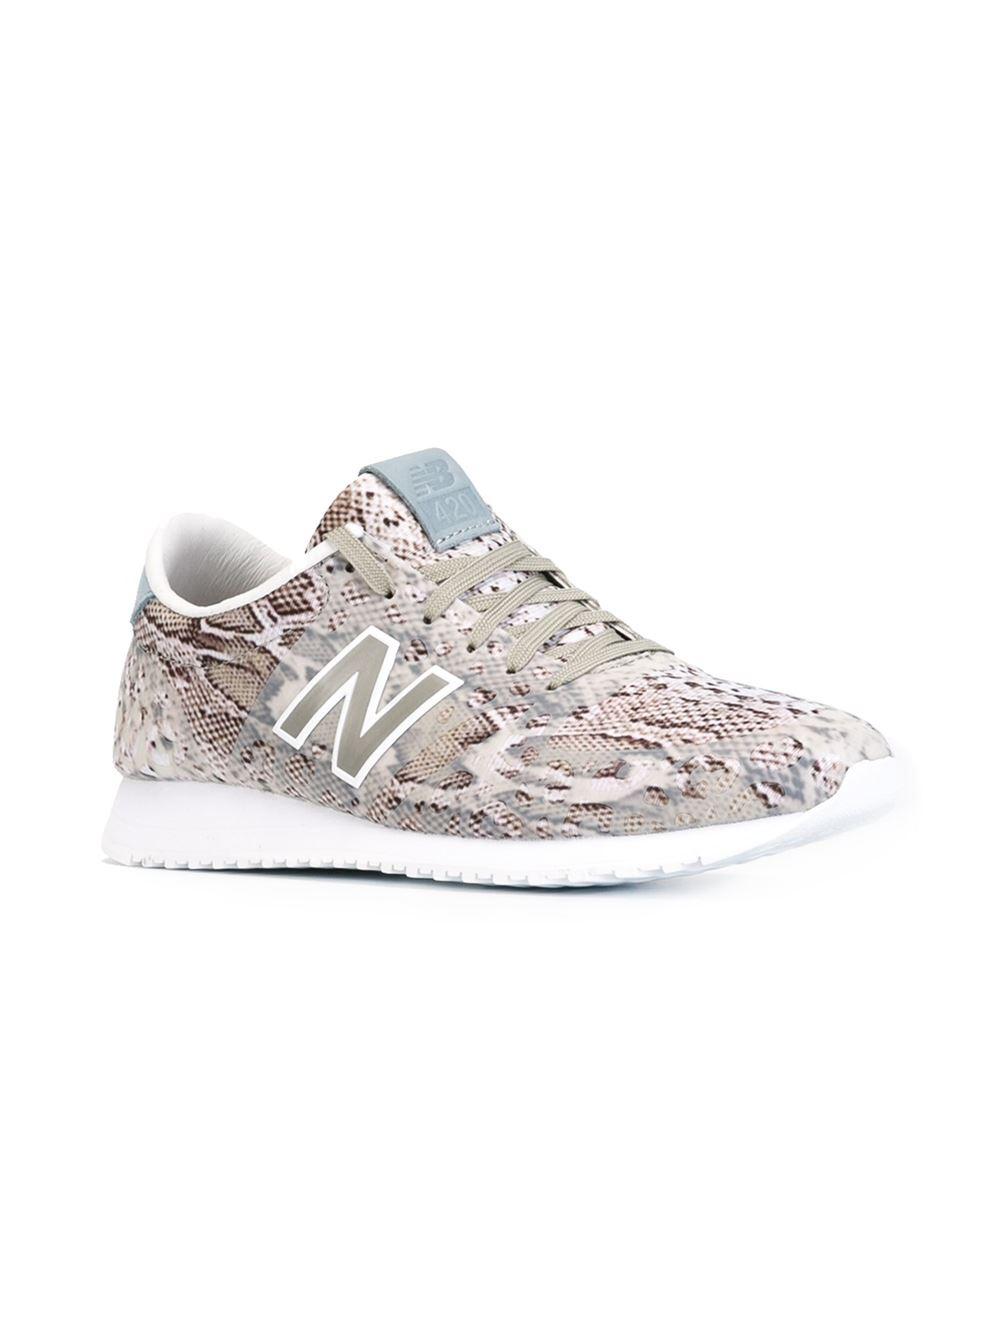 New Balance Snakeskin Print Trainers in Grey (Brown) | Lyst